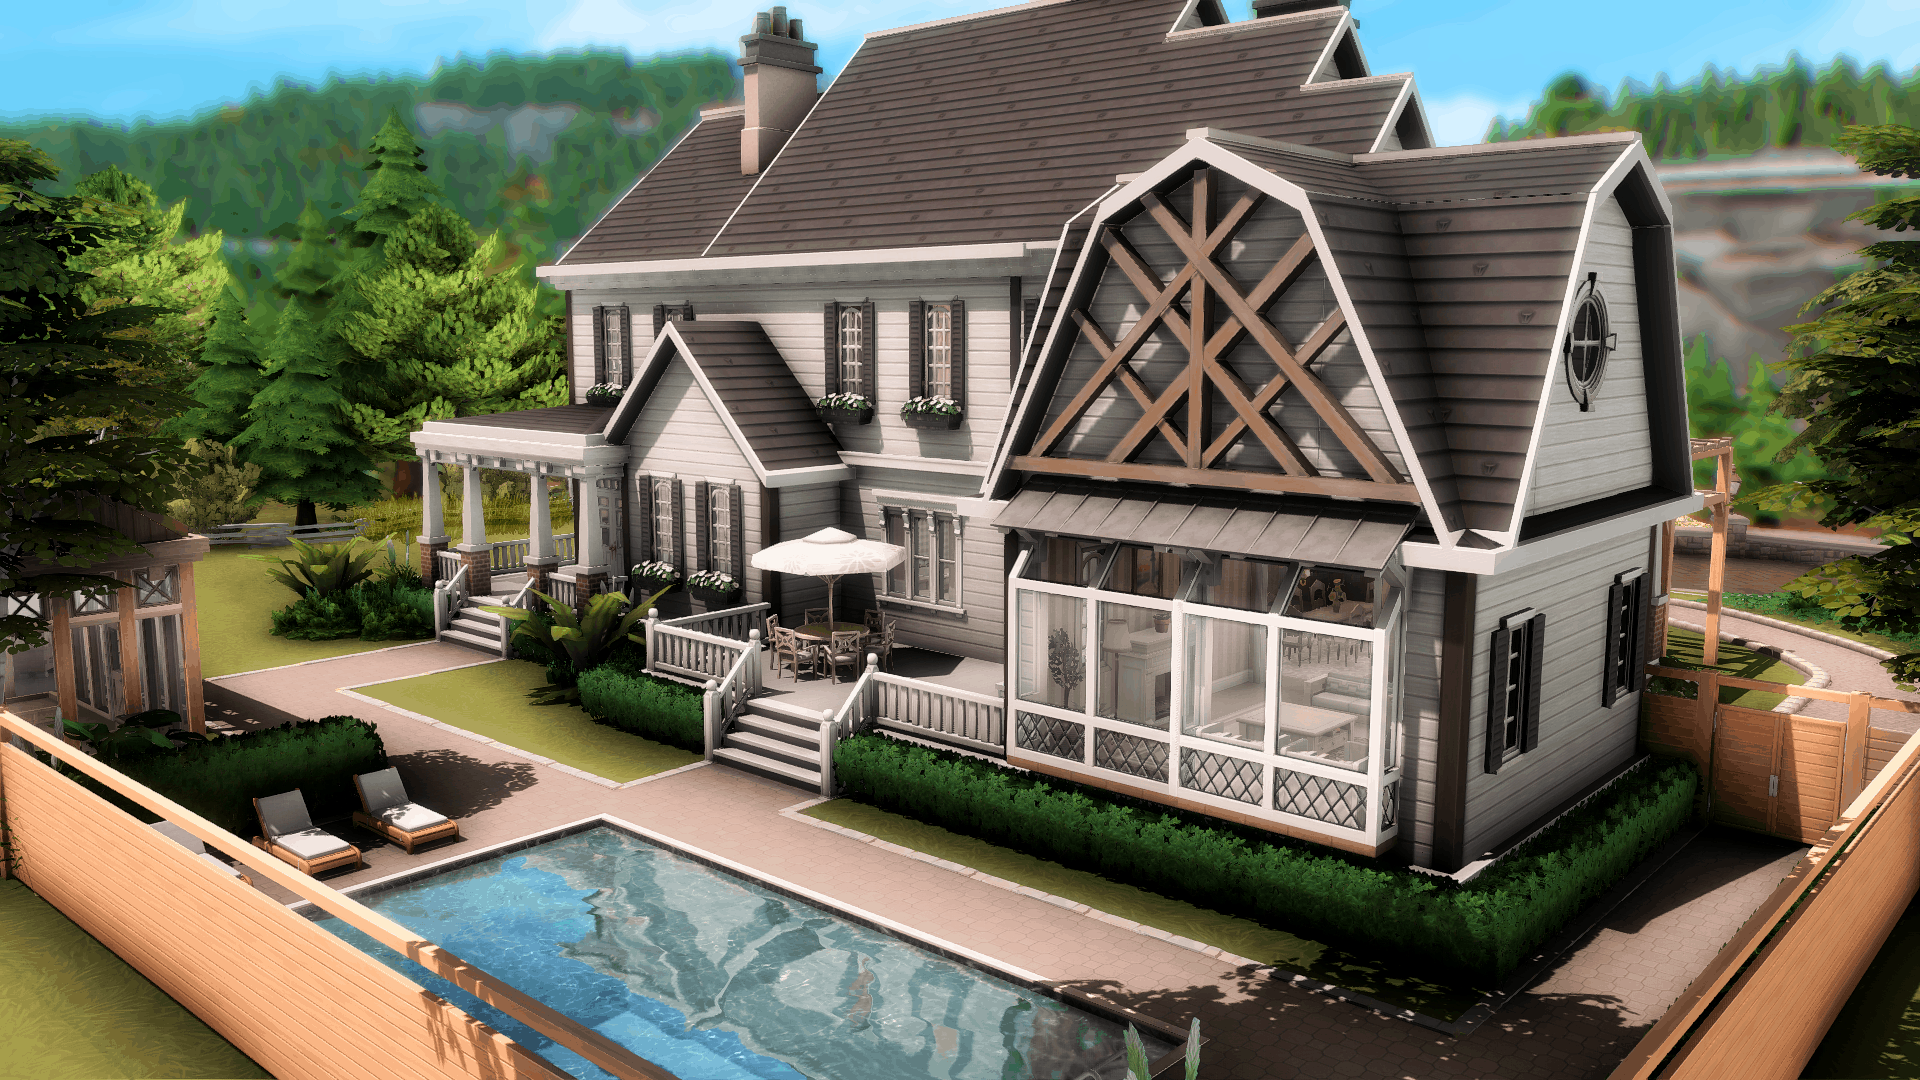 sims 4 house no cc download